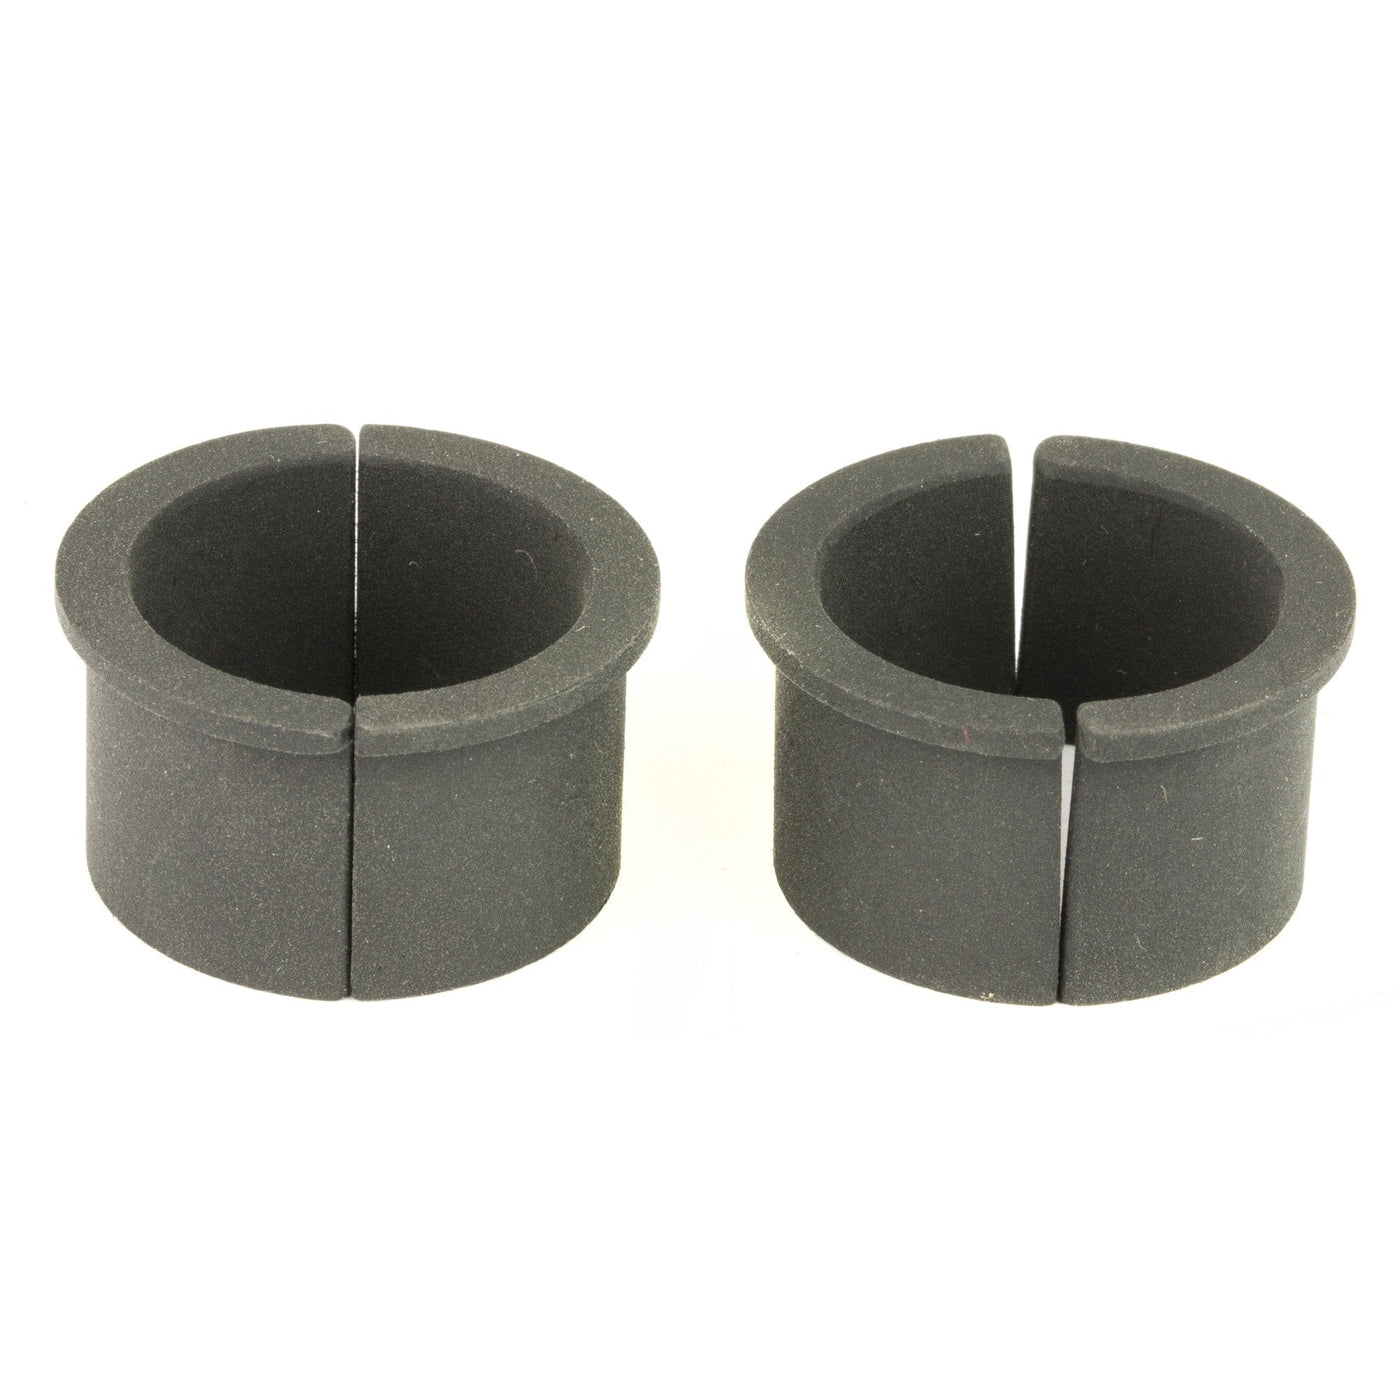 GG&G, Inc. Gg&g 30mm To 1" Ring Reducer Scope Mounts